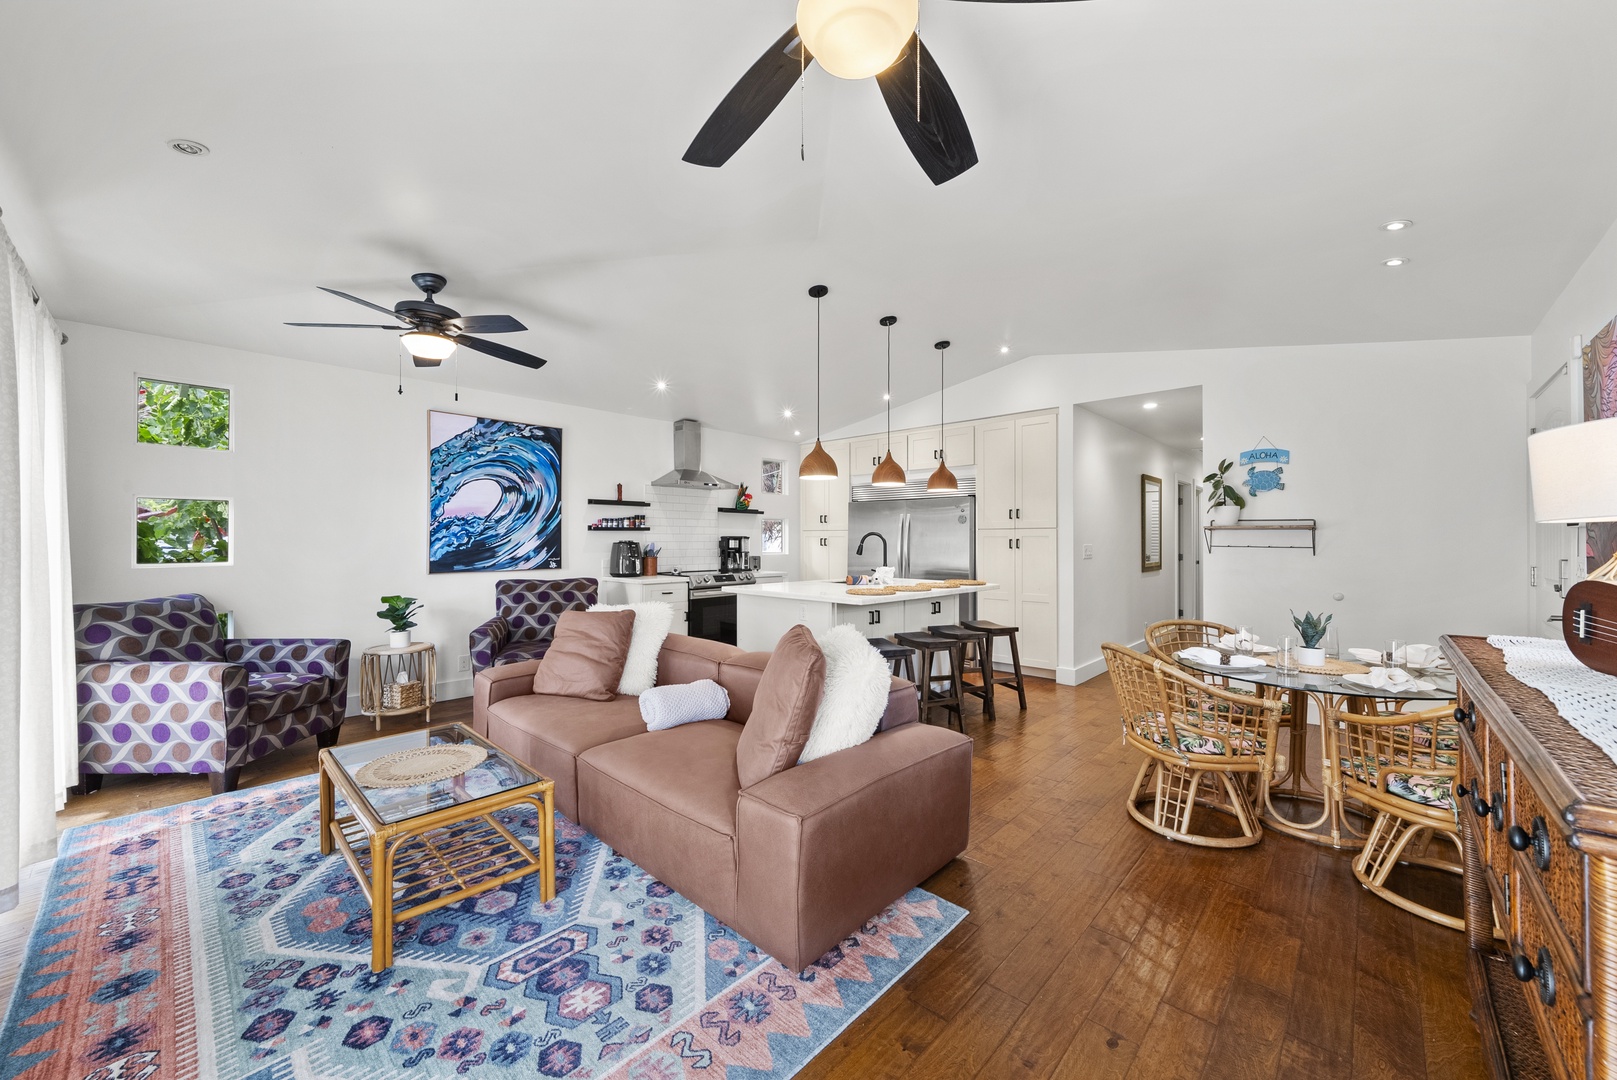 Kaaawa Vacation Rentals, Ka'a'awa Hale - Enjoy the ease of socializing in our open floorplan that connects living, dining, and kitchen spaces.